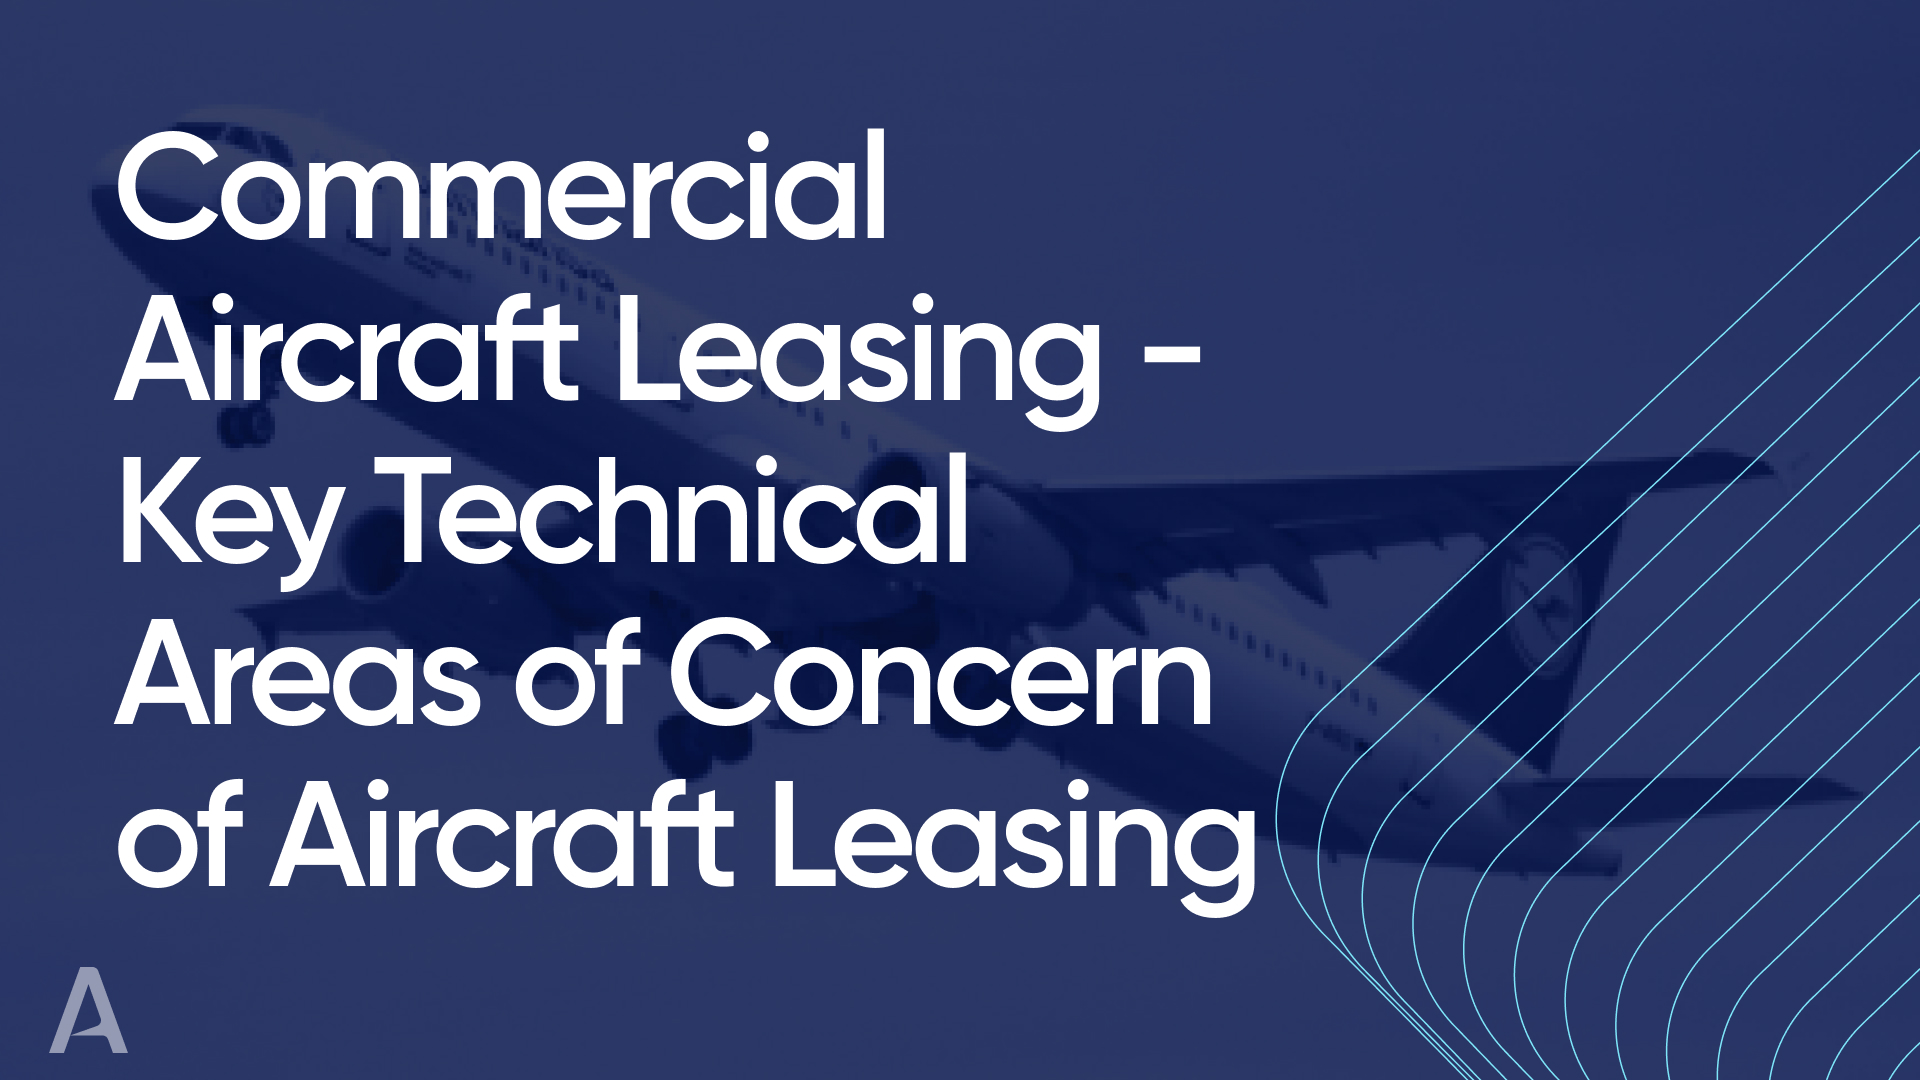 Commercial Aircraft Leasing - Key Technical Areas of Concern of Aircraft Leasing